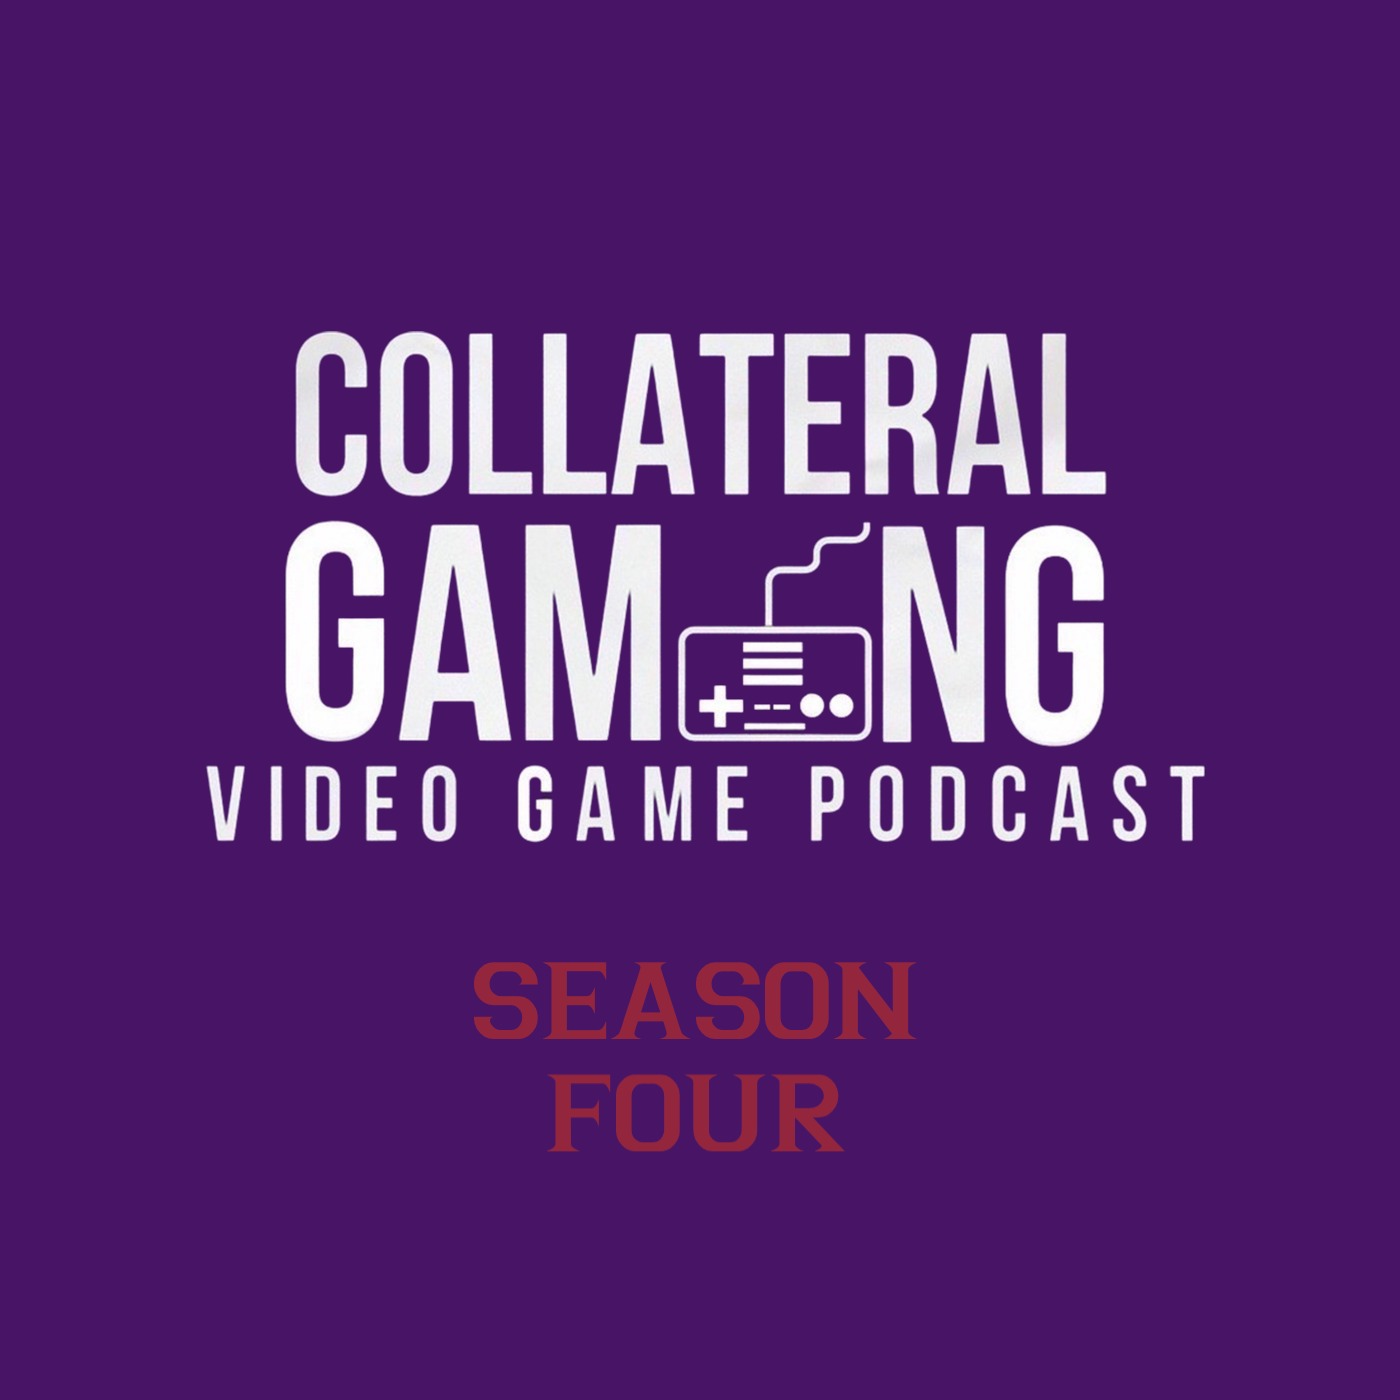 Collateral Gaming Video Game Podcast